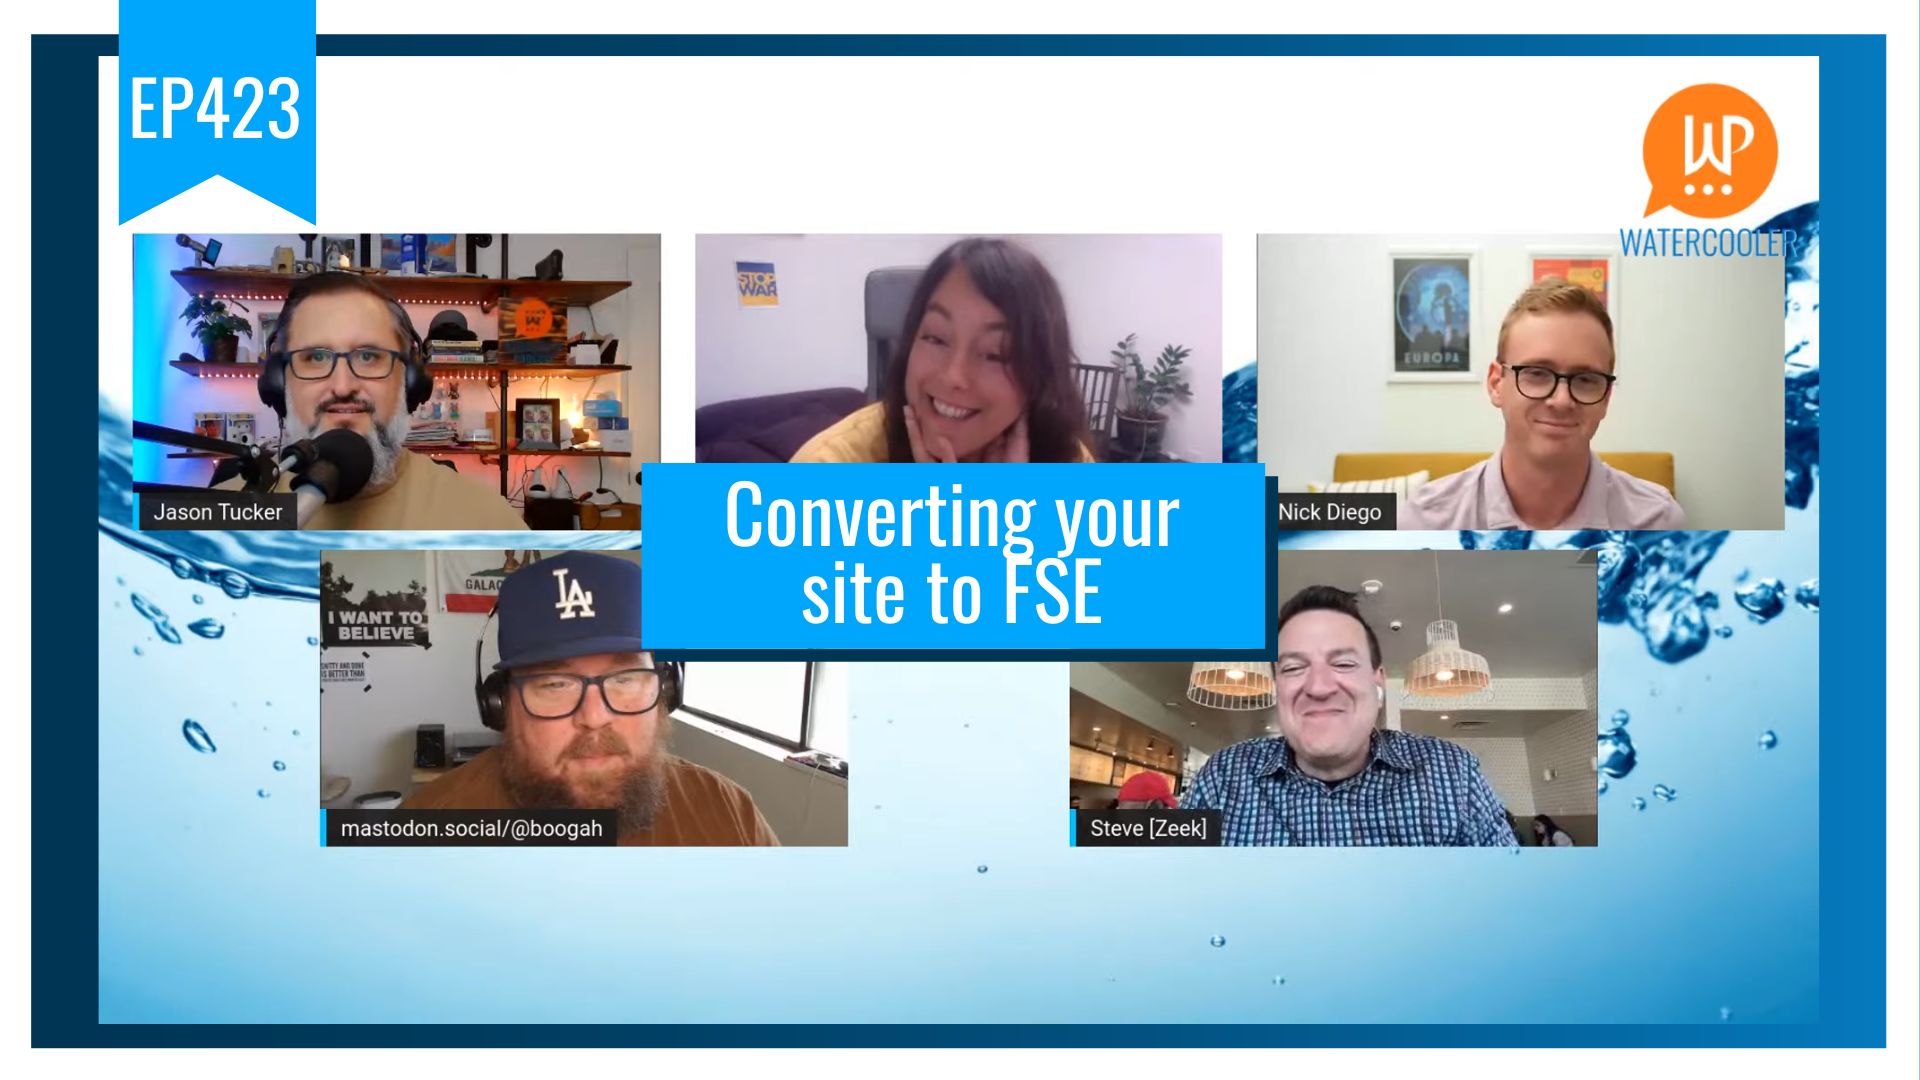 EP423 – Converting your site to FSE